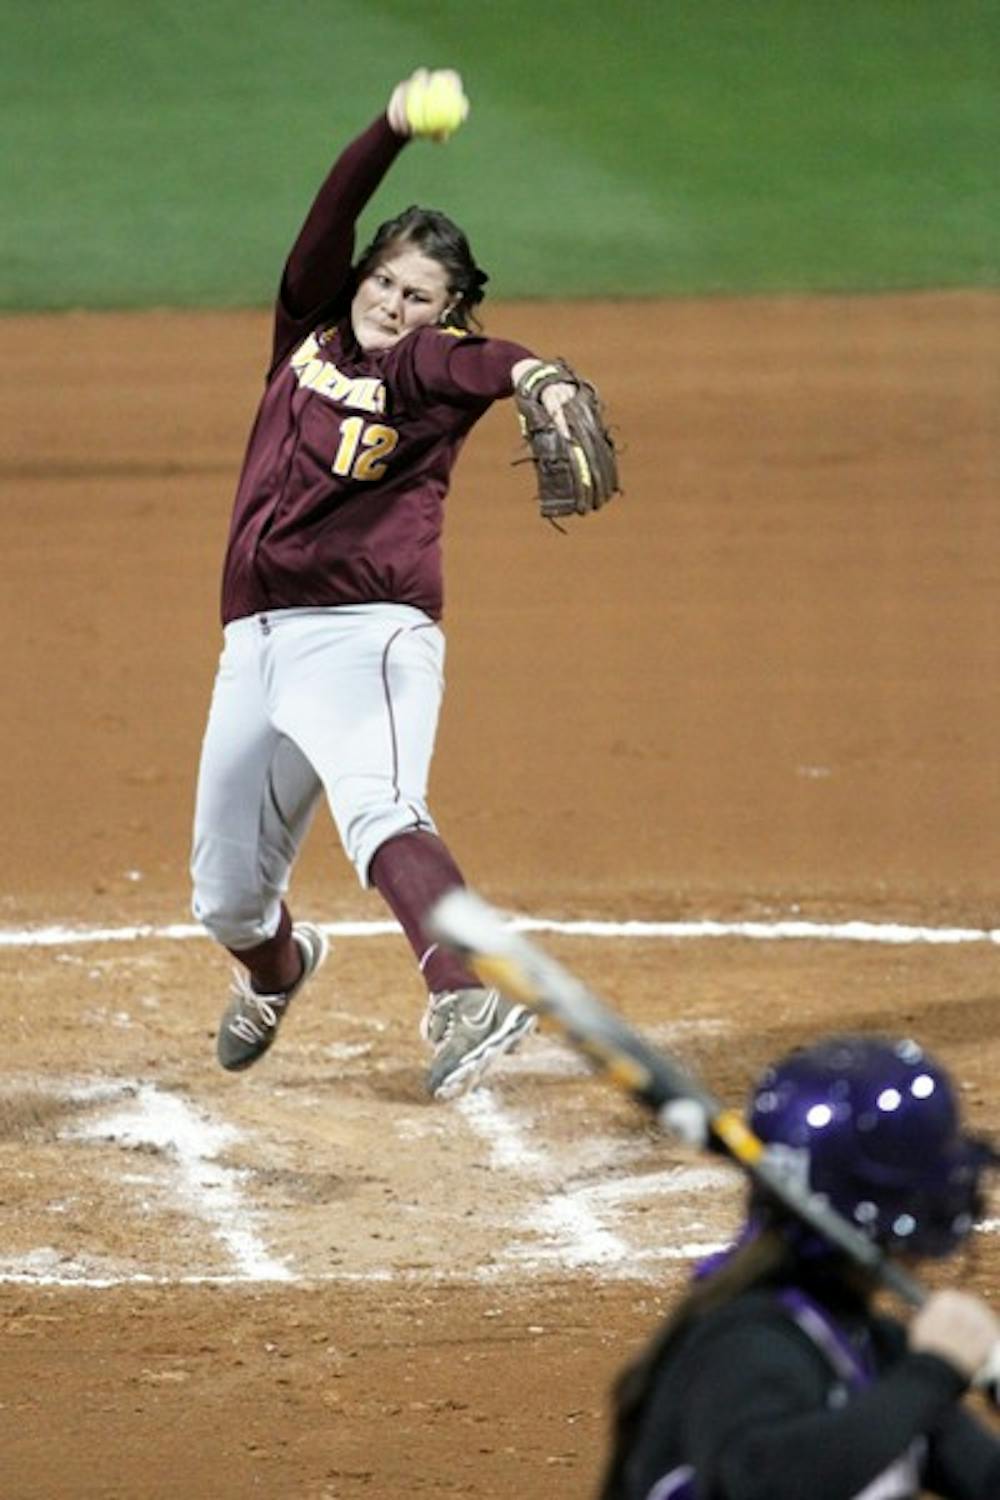 Dallas Escobedo throws a pitch in a game against Northwestern on Feb. 10. Escobedo and the Sun Devils are second in the Pac-12 power rankings. (Photo by Lisa Bartoli)